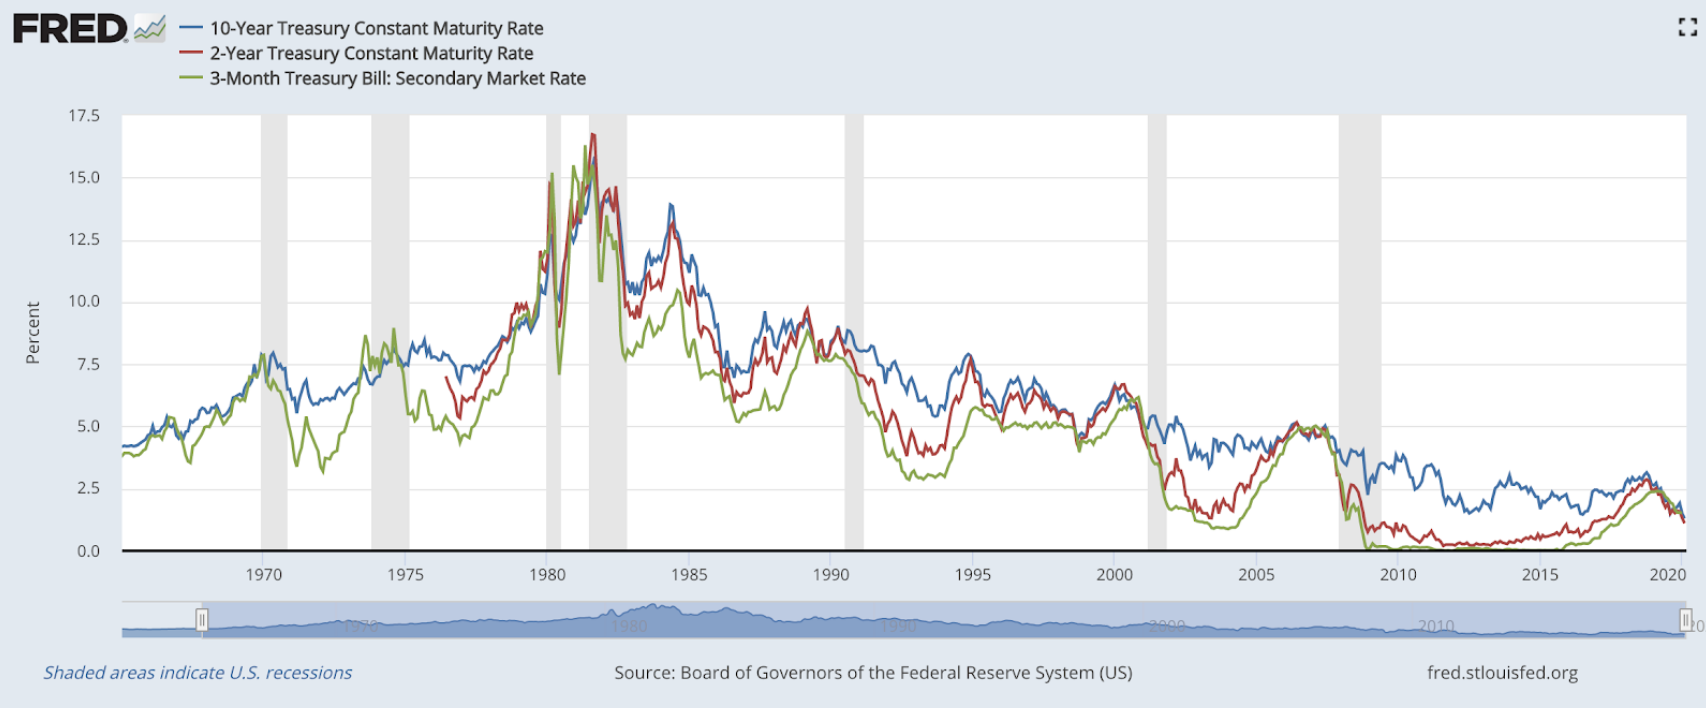 interest-rates-fred.png